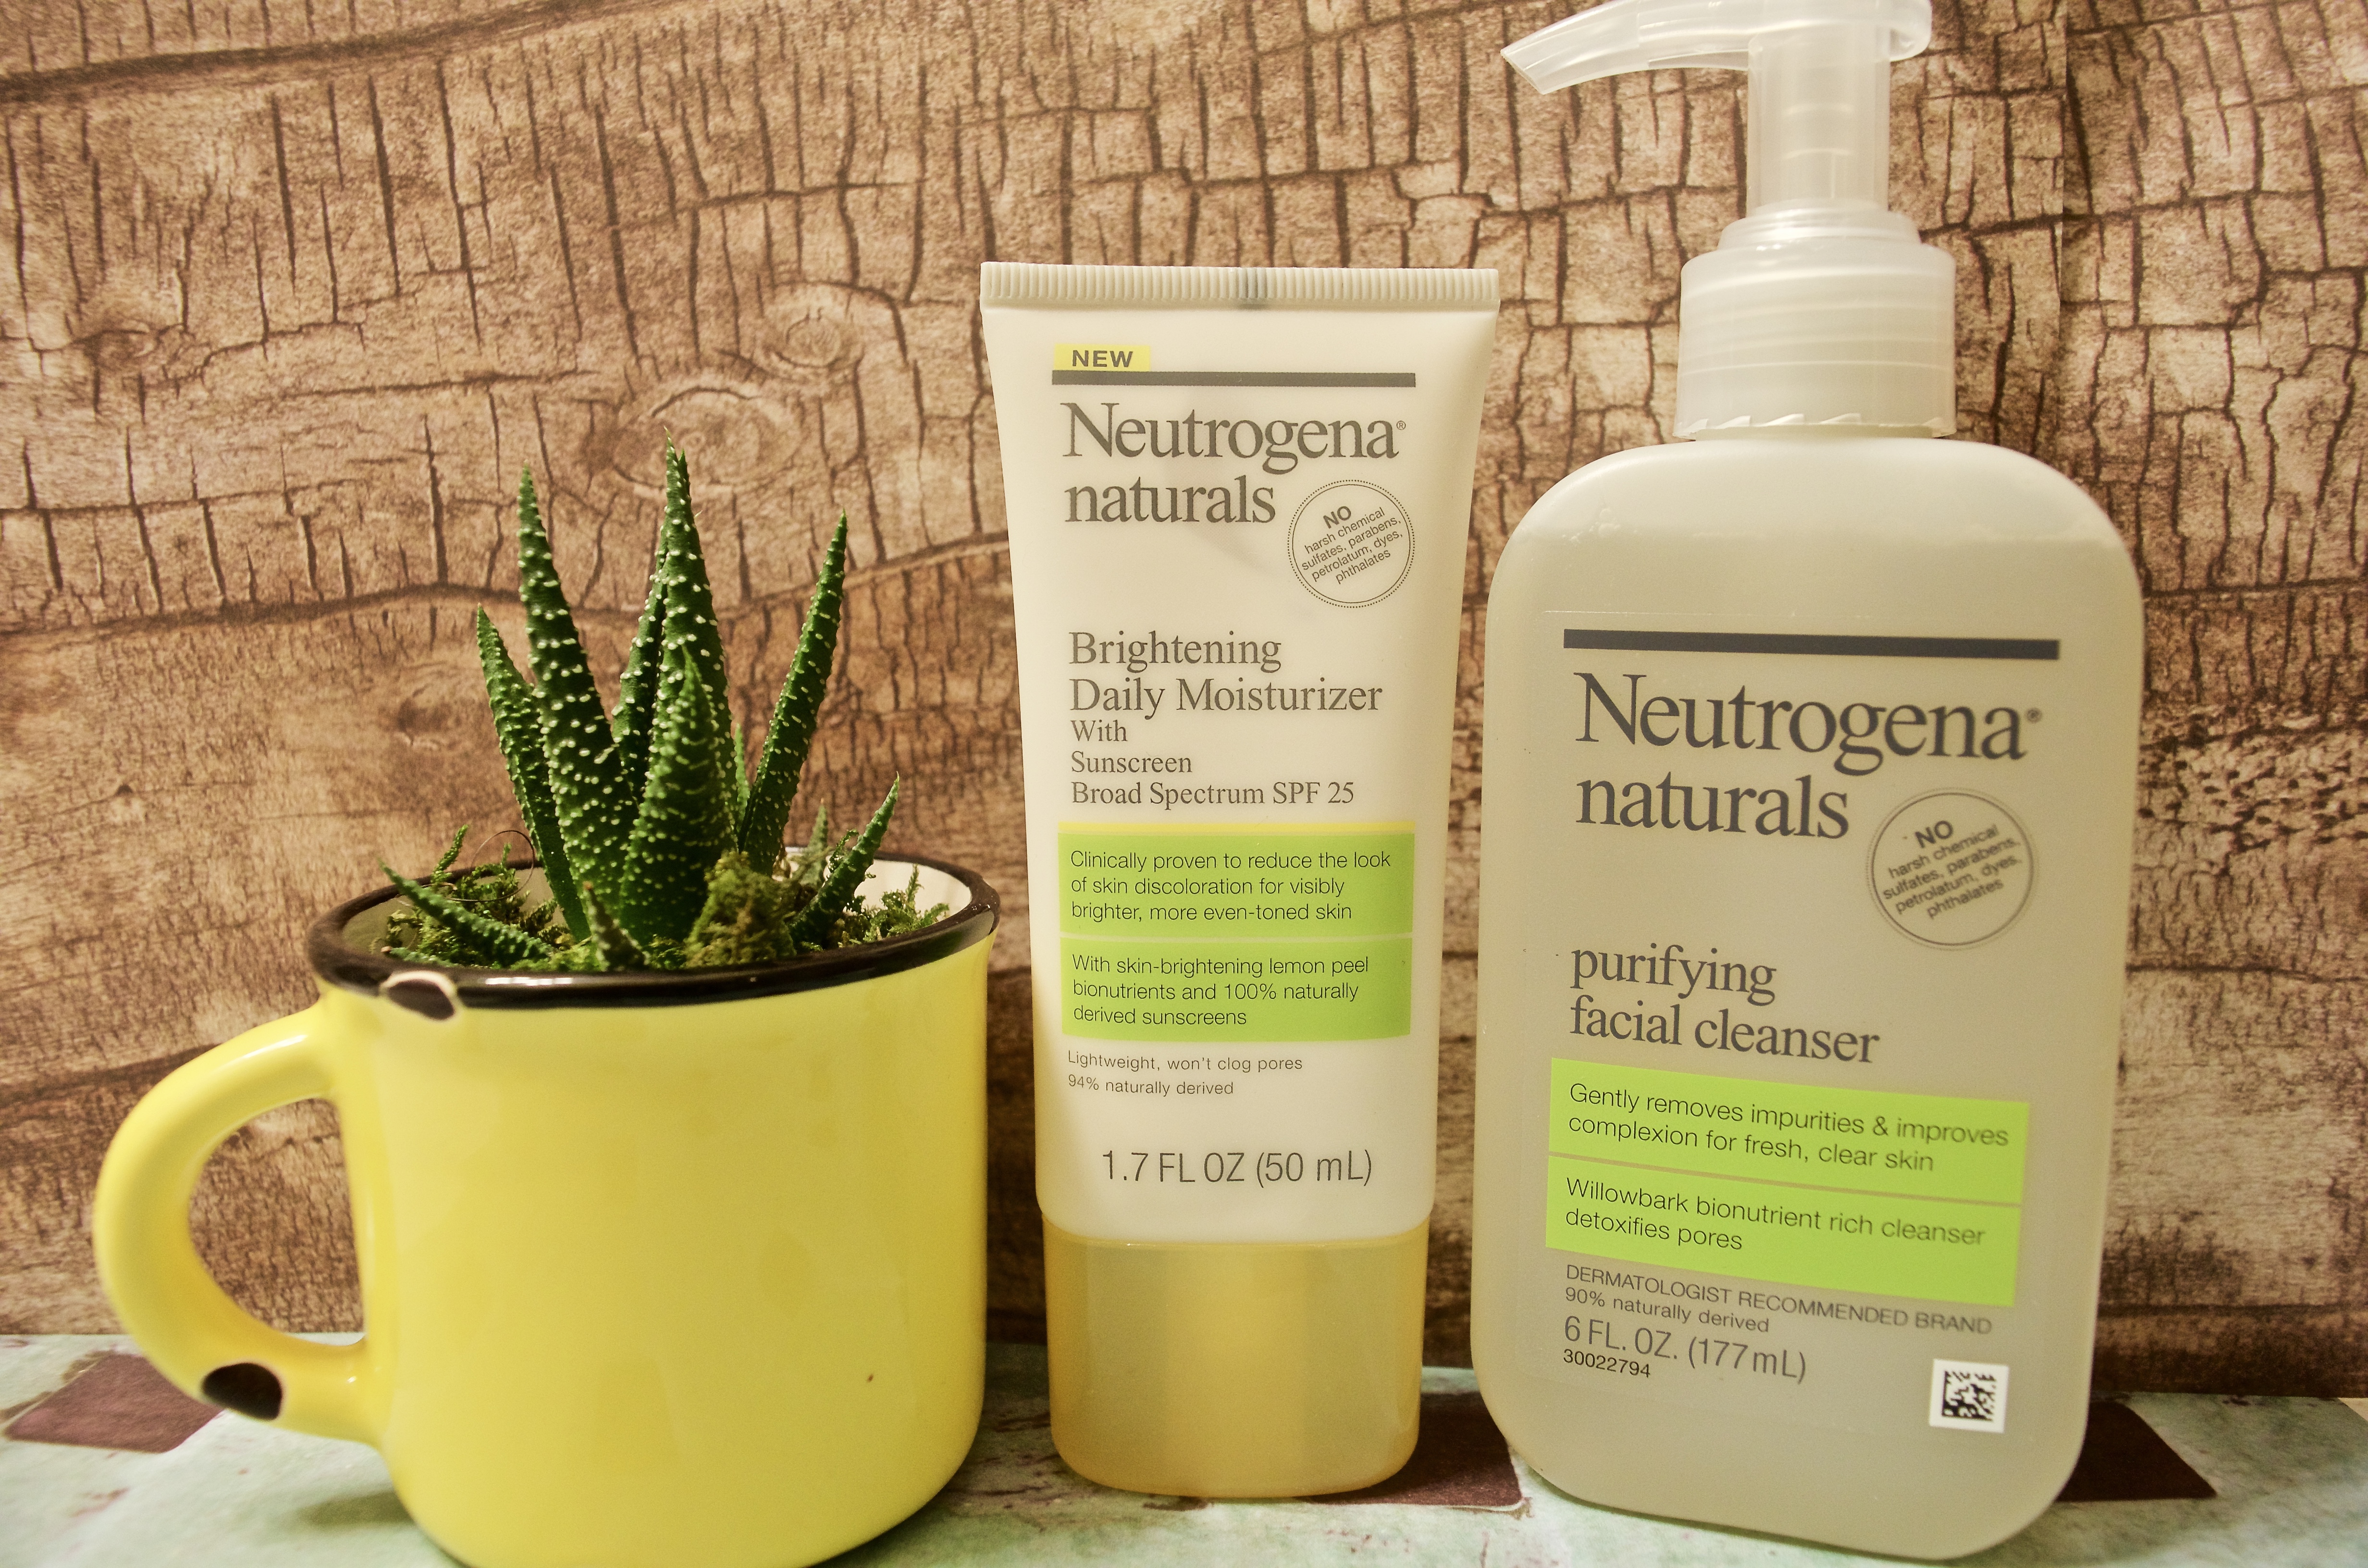 Taking Care of Yourself with Neutrogena Naturals Brightening Moisturizer and the Neutrogena Naturals Purifying Facial Cleanser